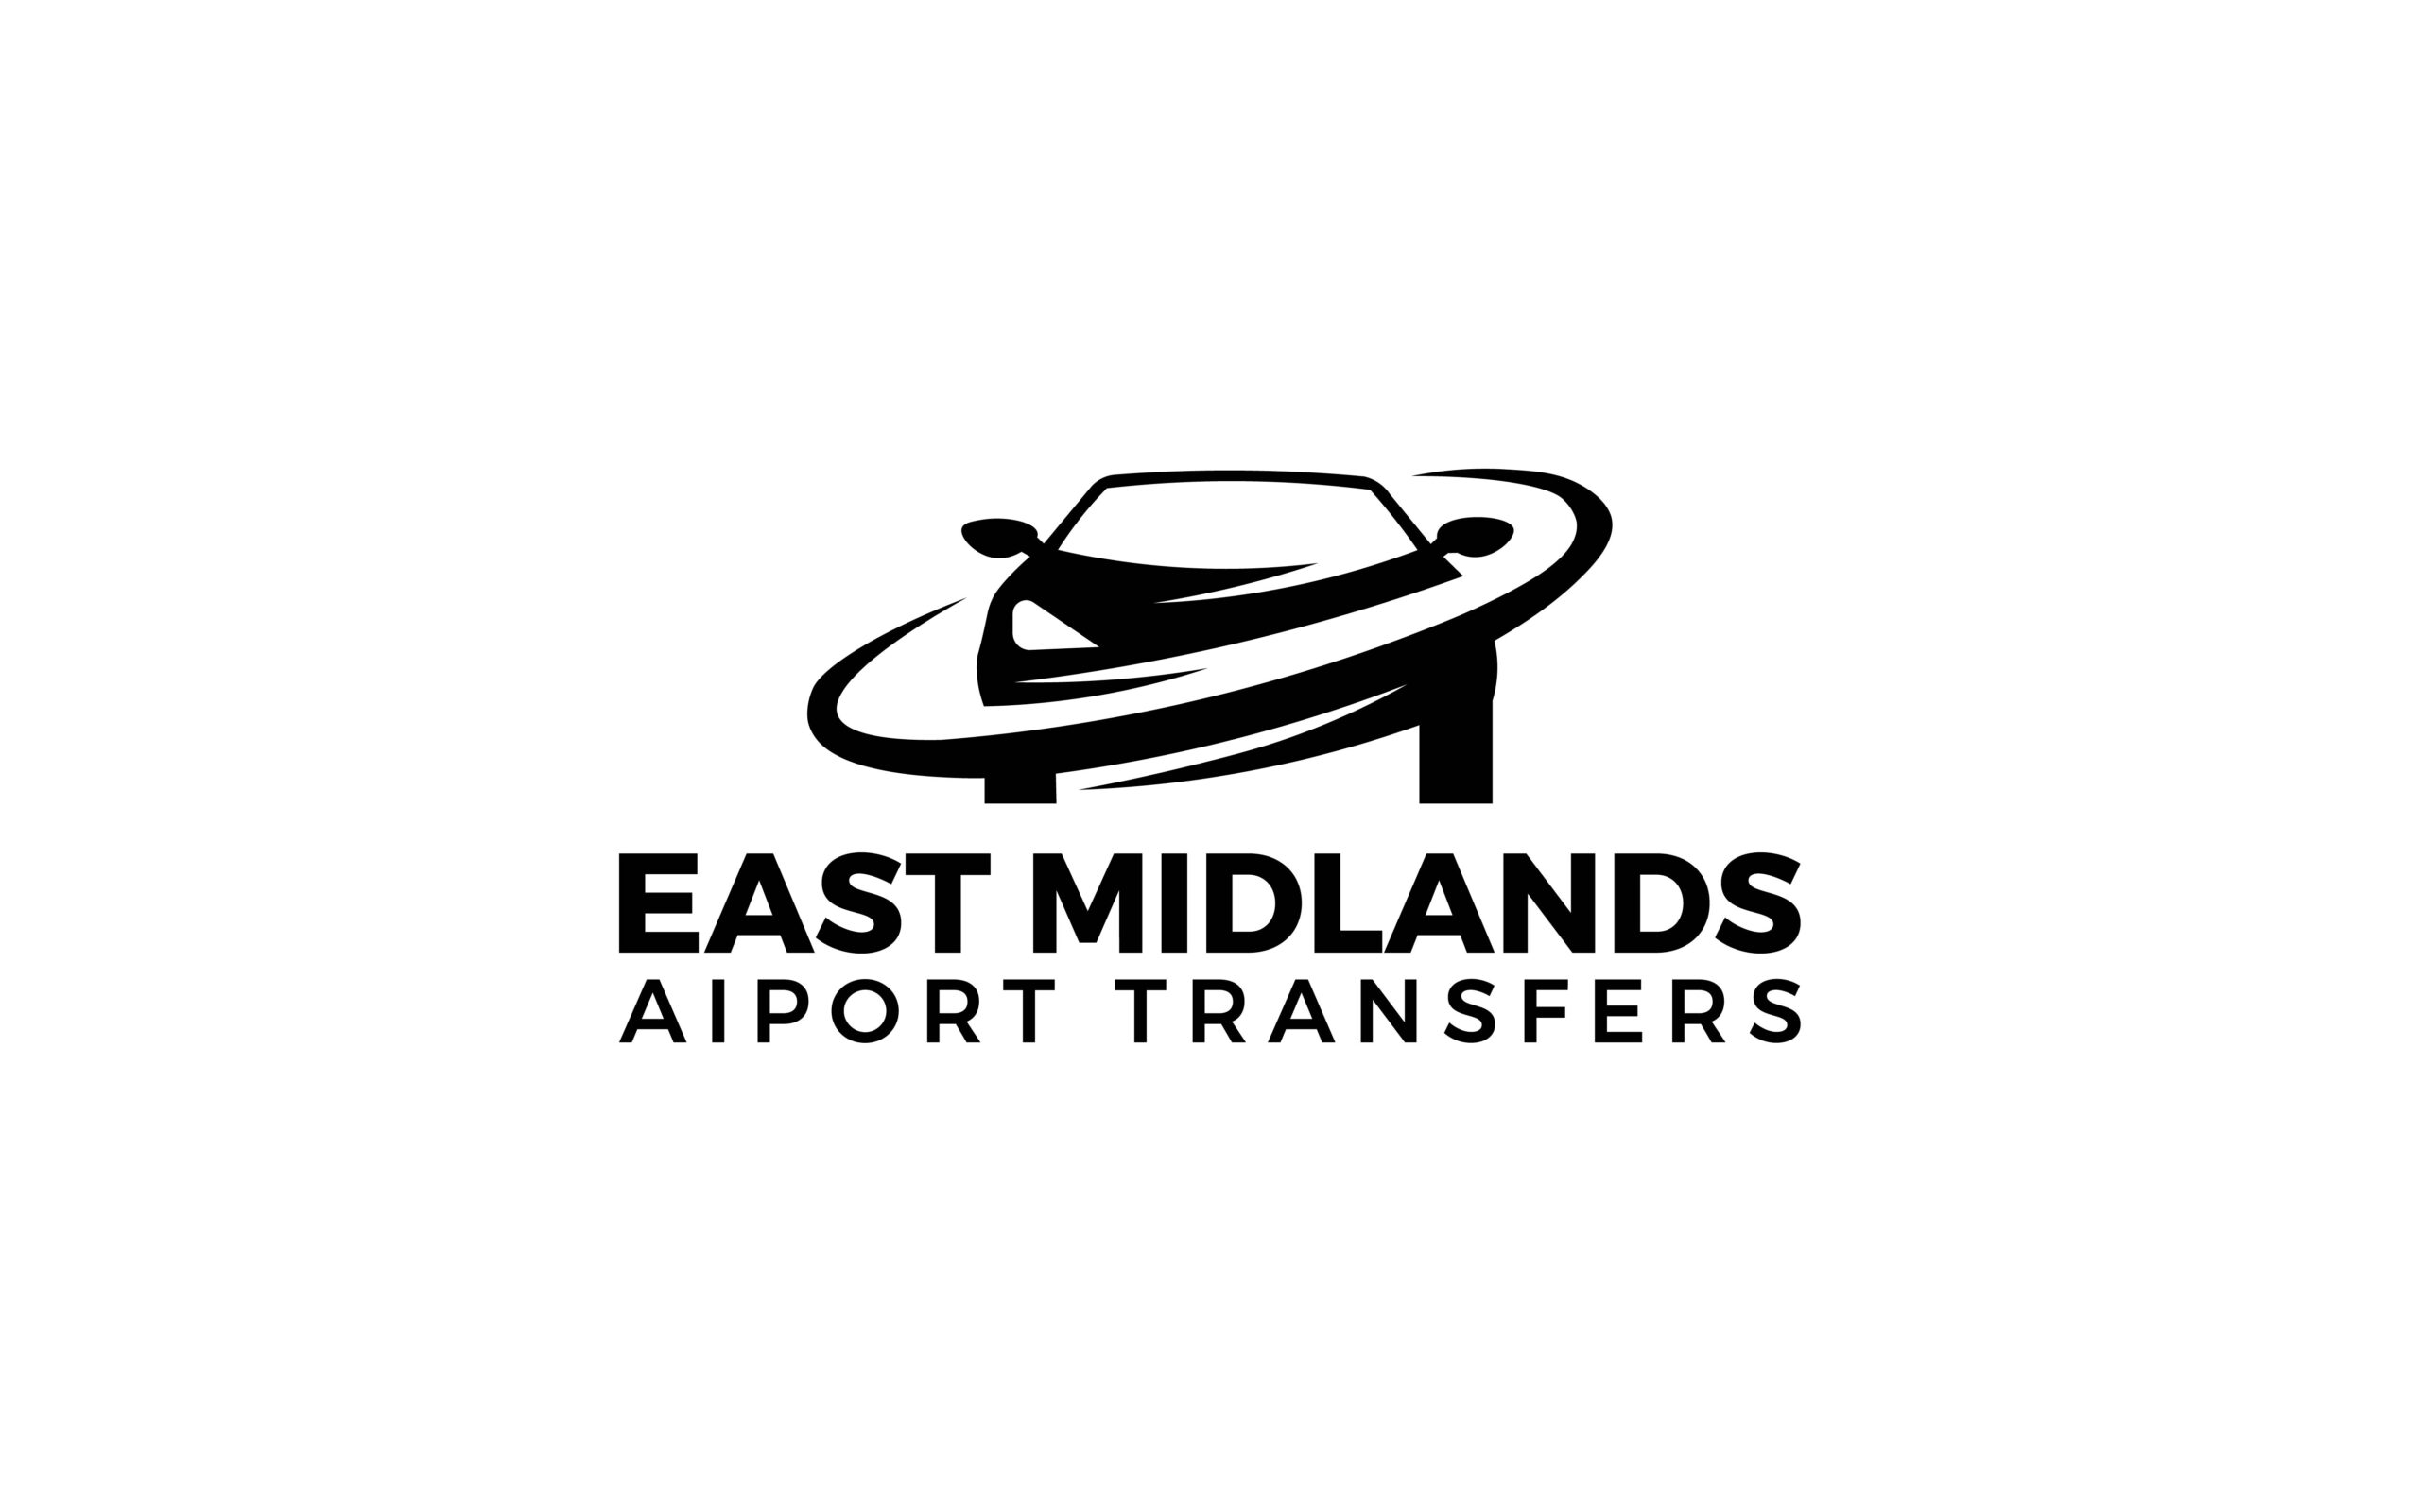 East Midlands Airport Transfers